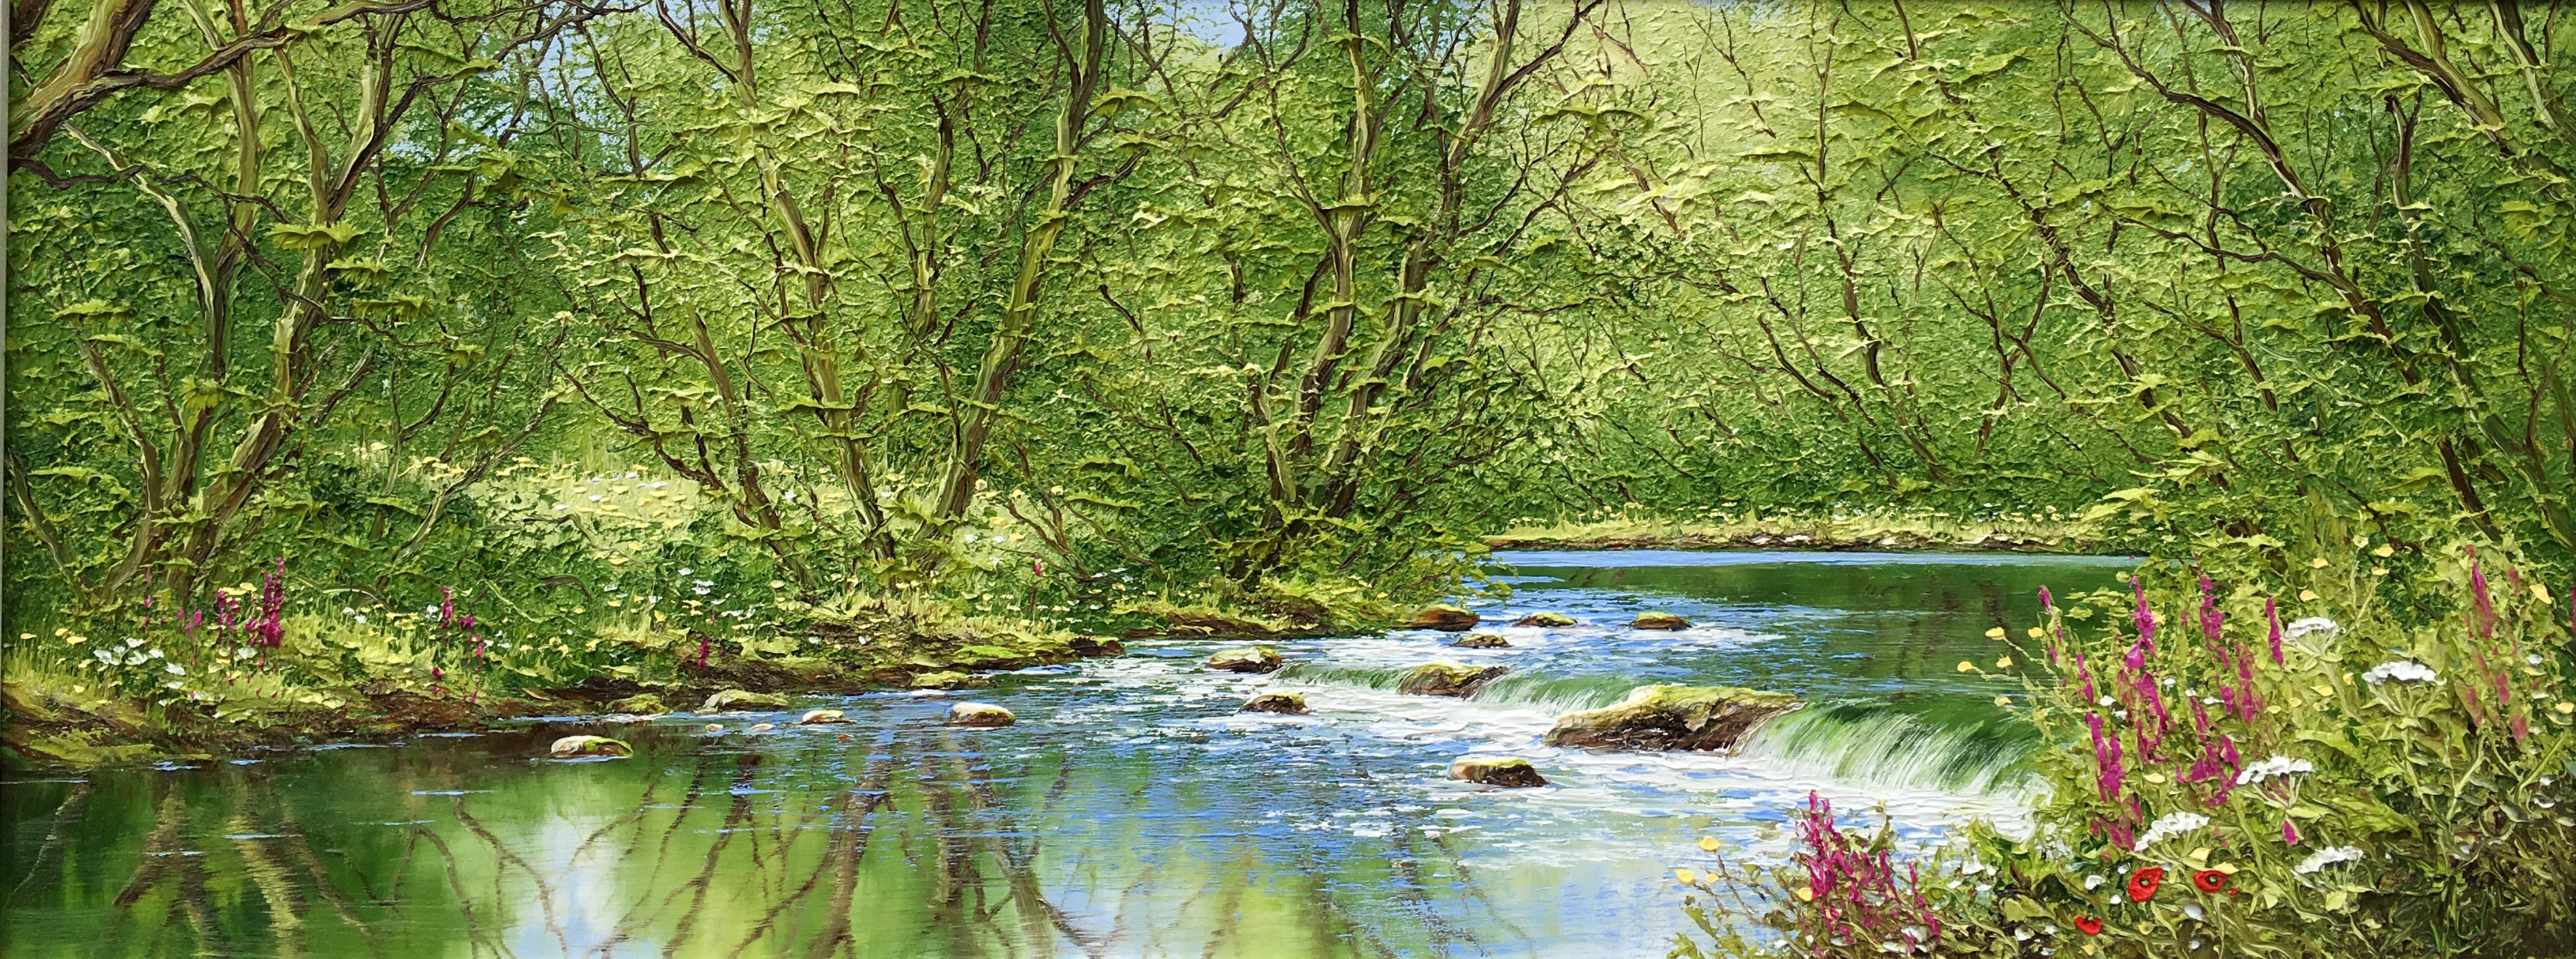 Cookhouse Gallery | Tranquil River